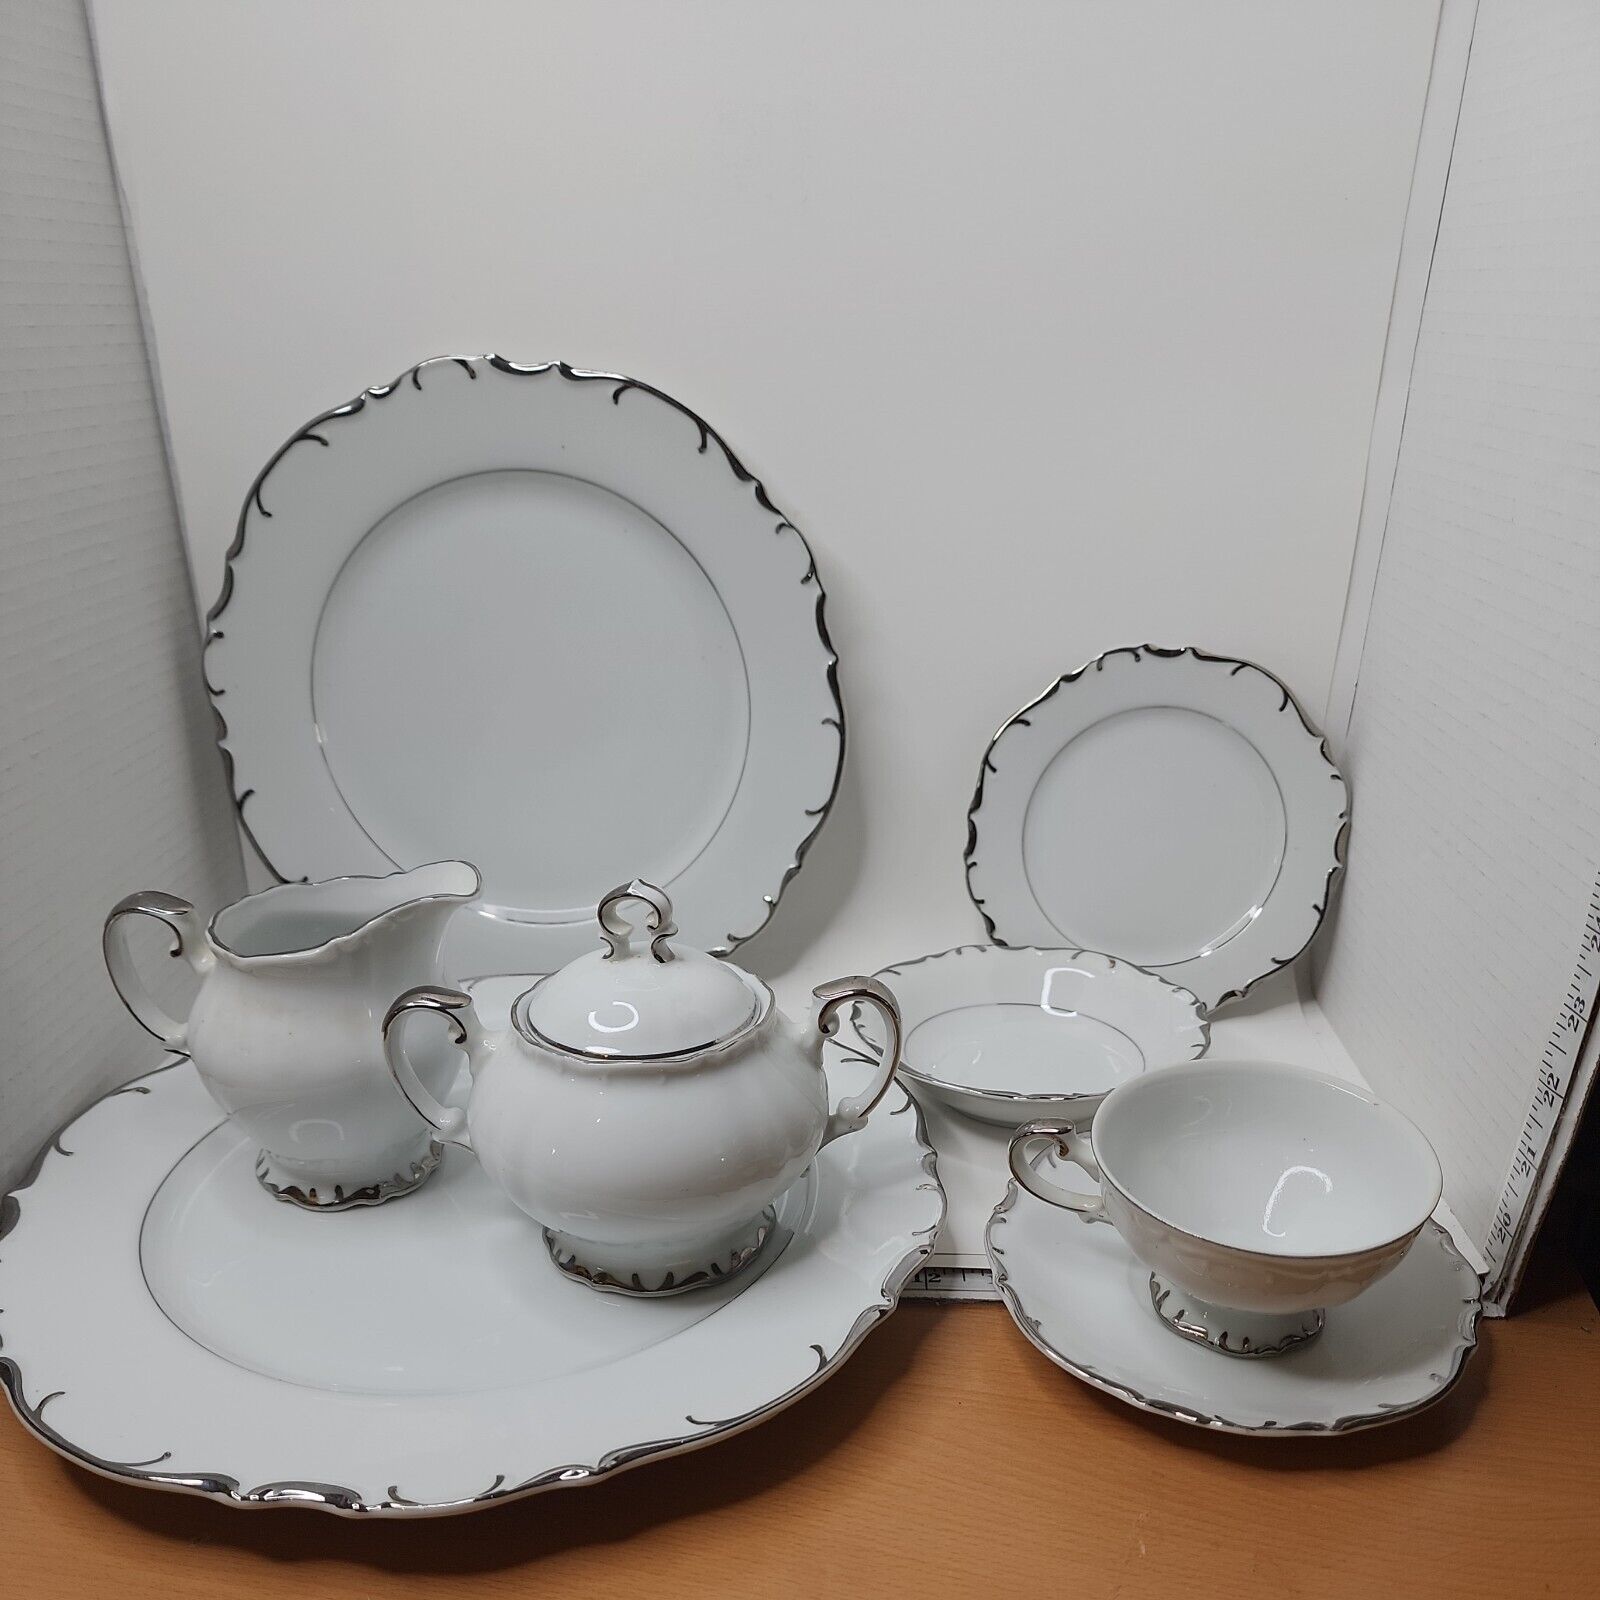 Nobility by Bristol silver trim China Dinnerware setting for 4